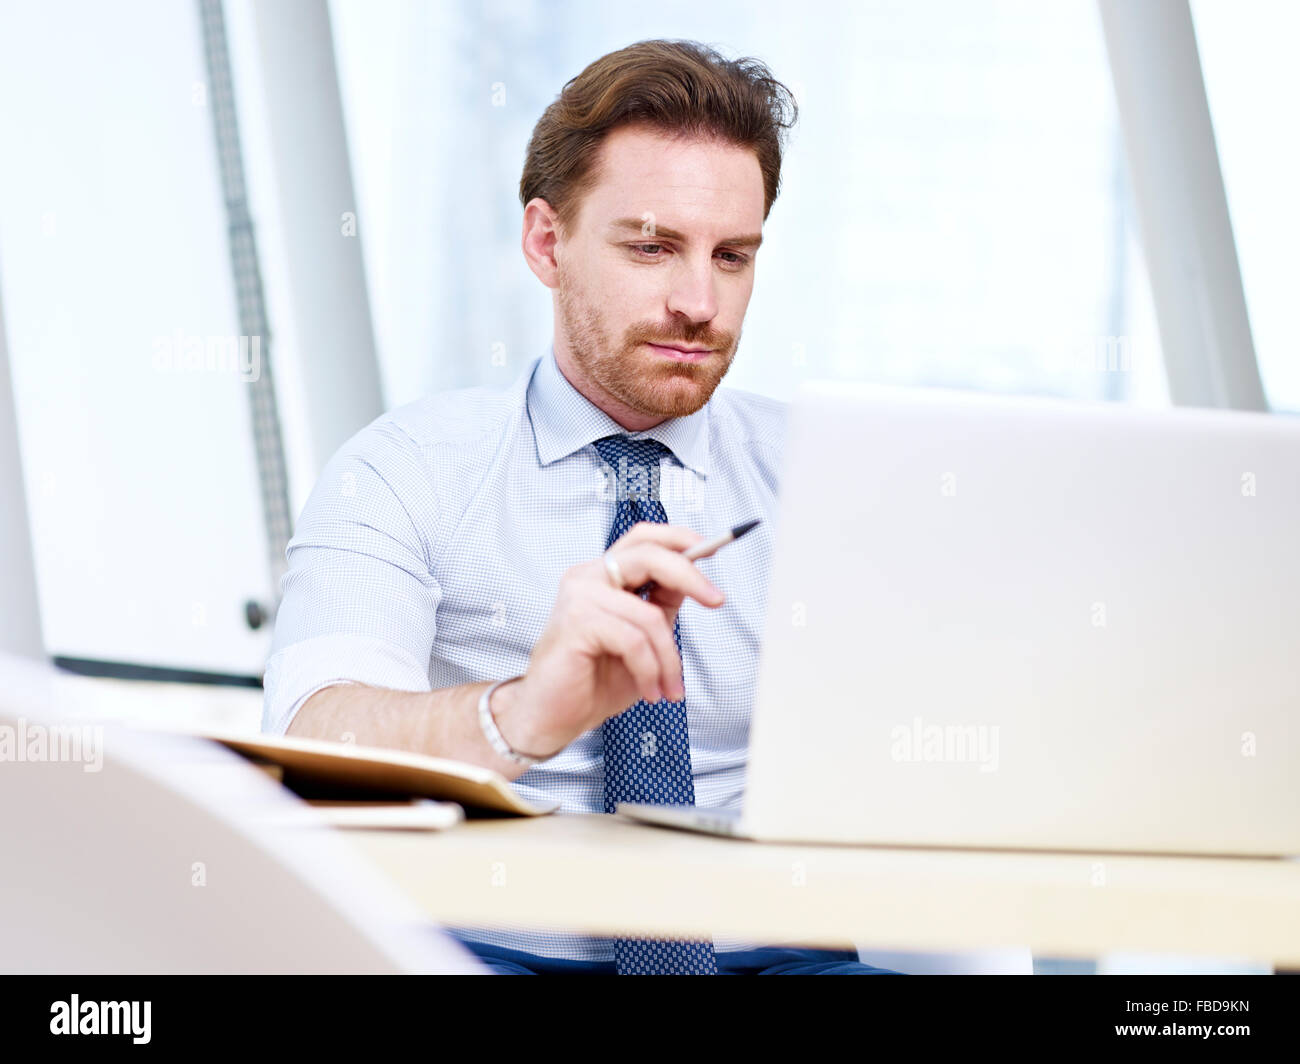 Business Man working in office with laptop Banque D'Images